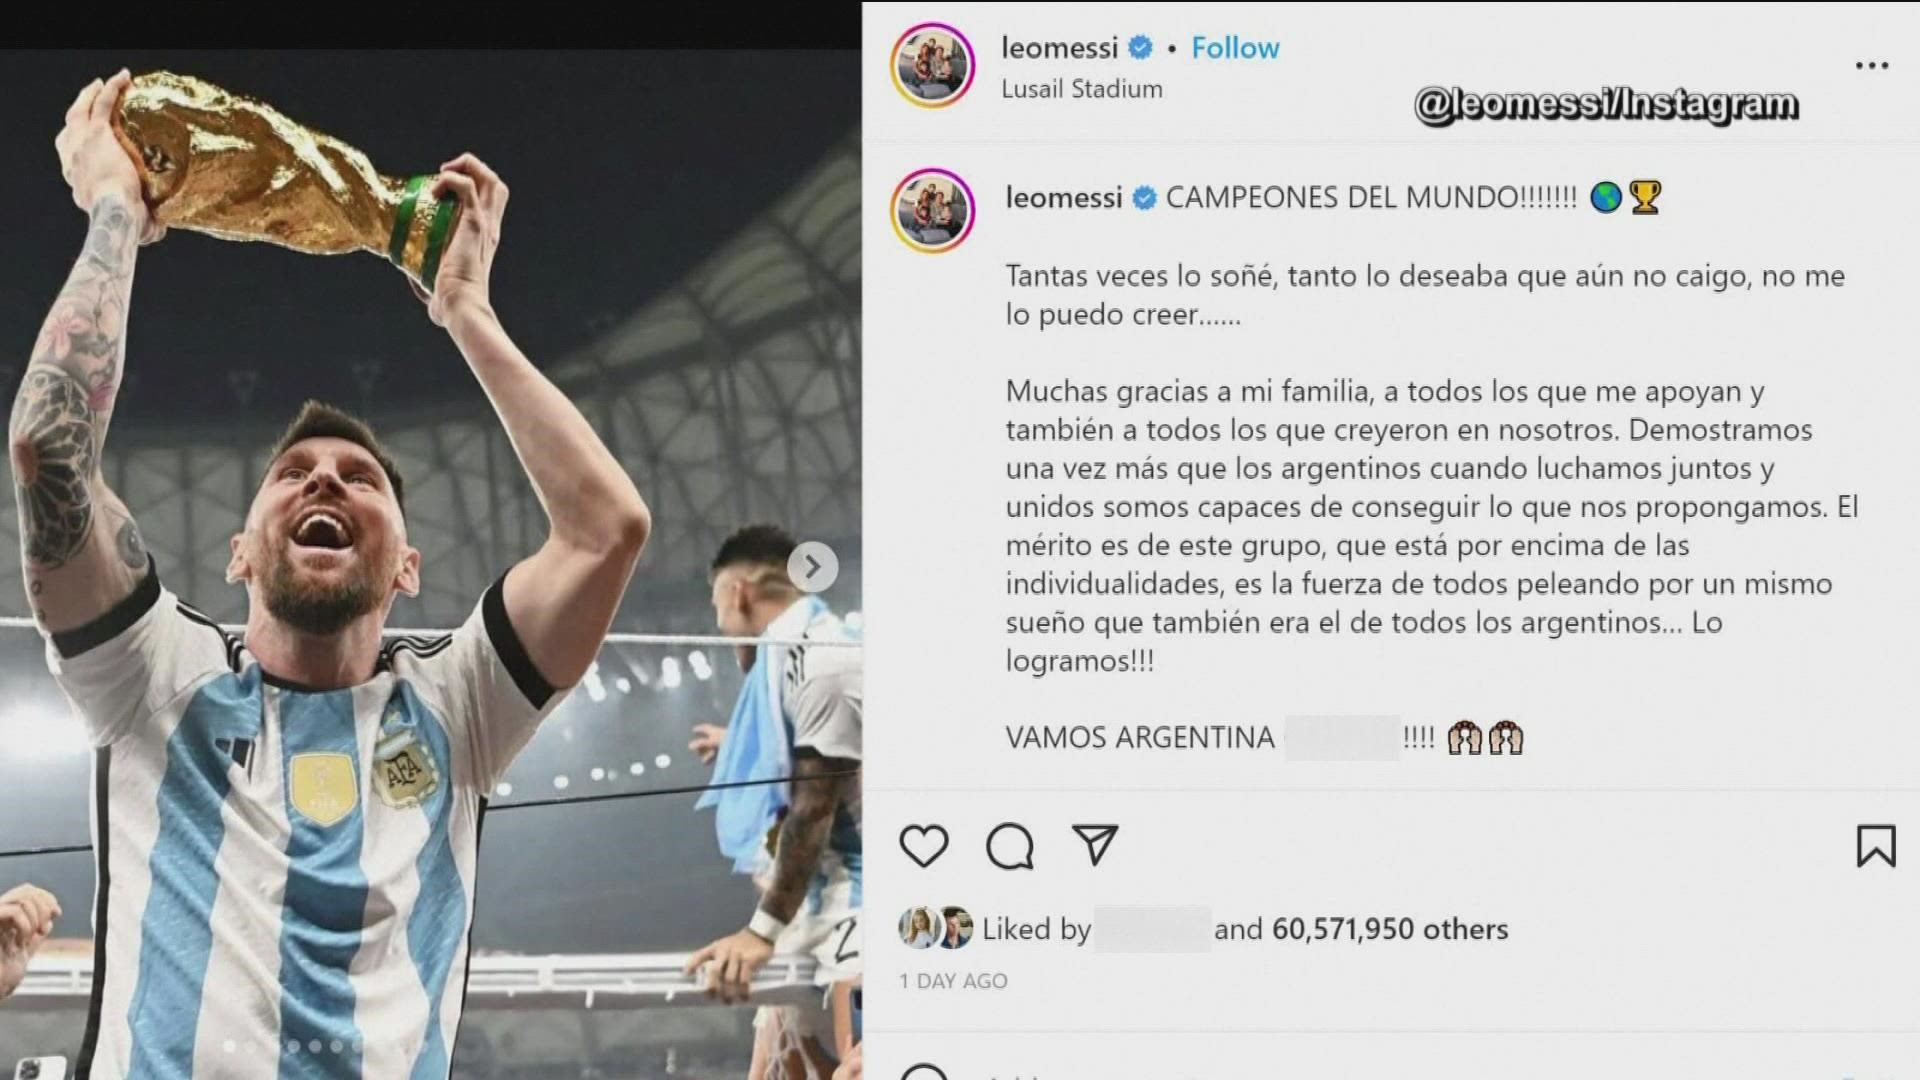 With more than 65 million likes, the photo of the Argentina star lifting the World Cup trophy is now the most liked social media post ever.